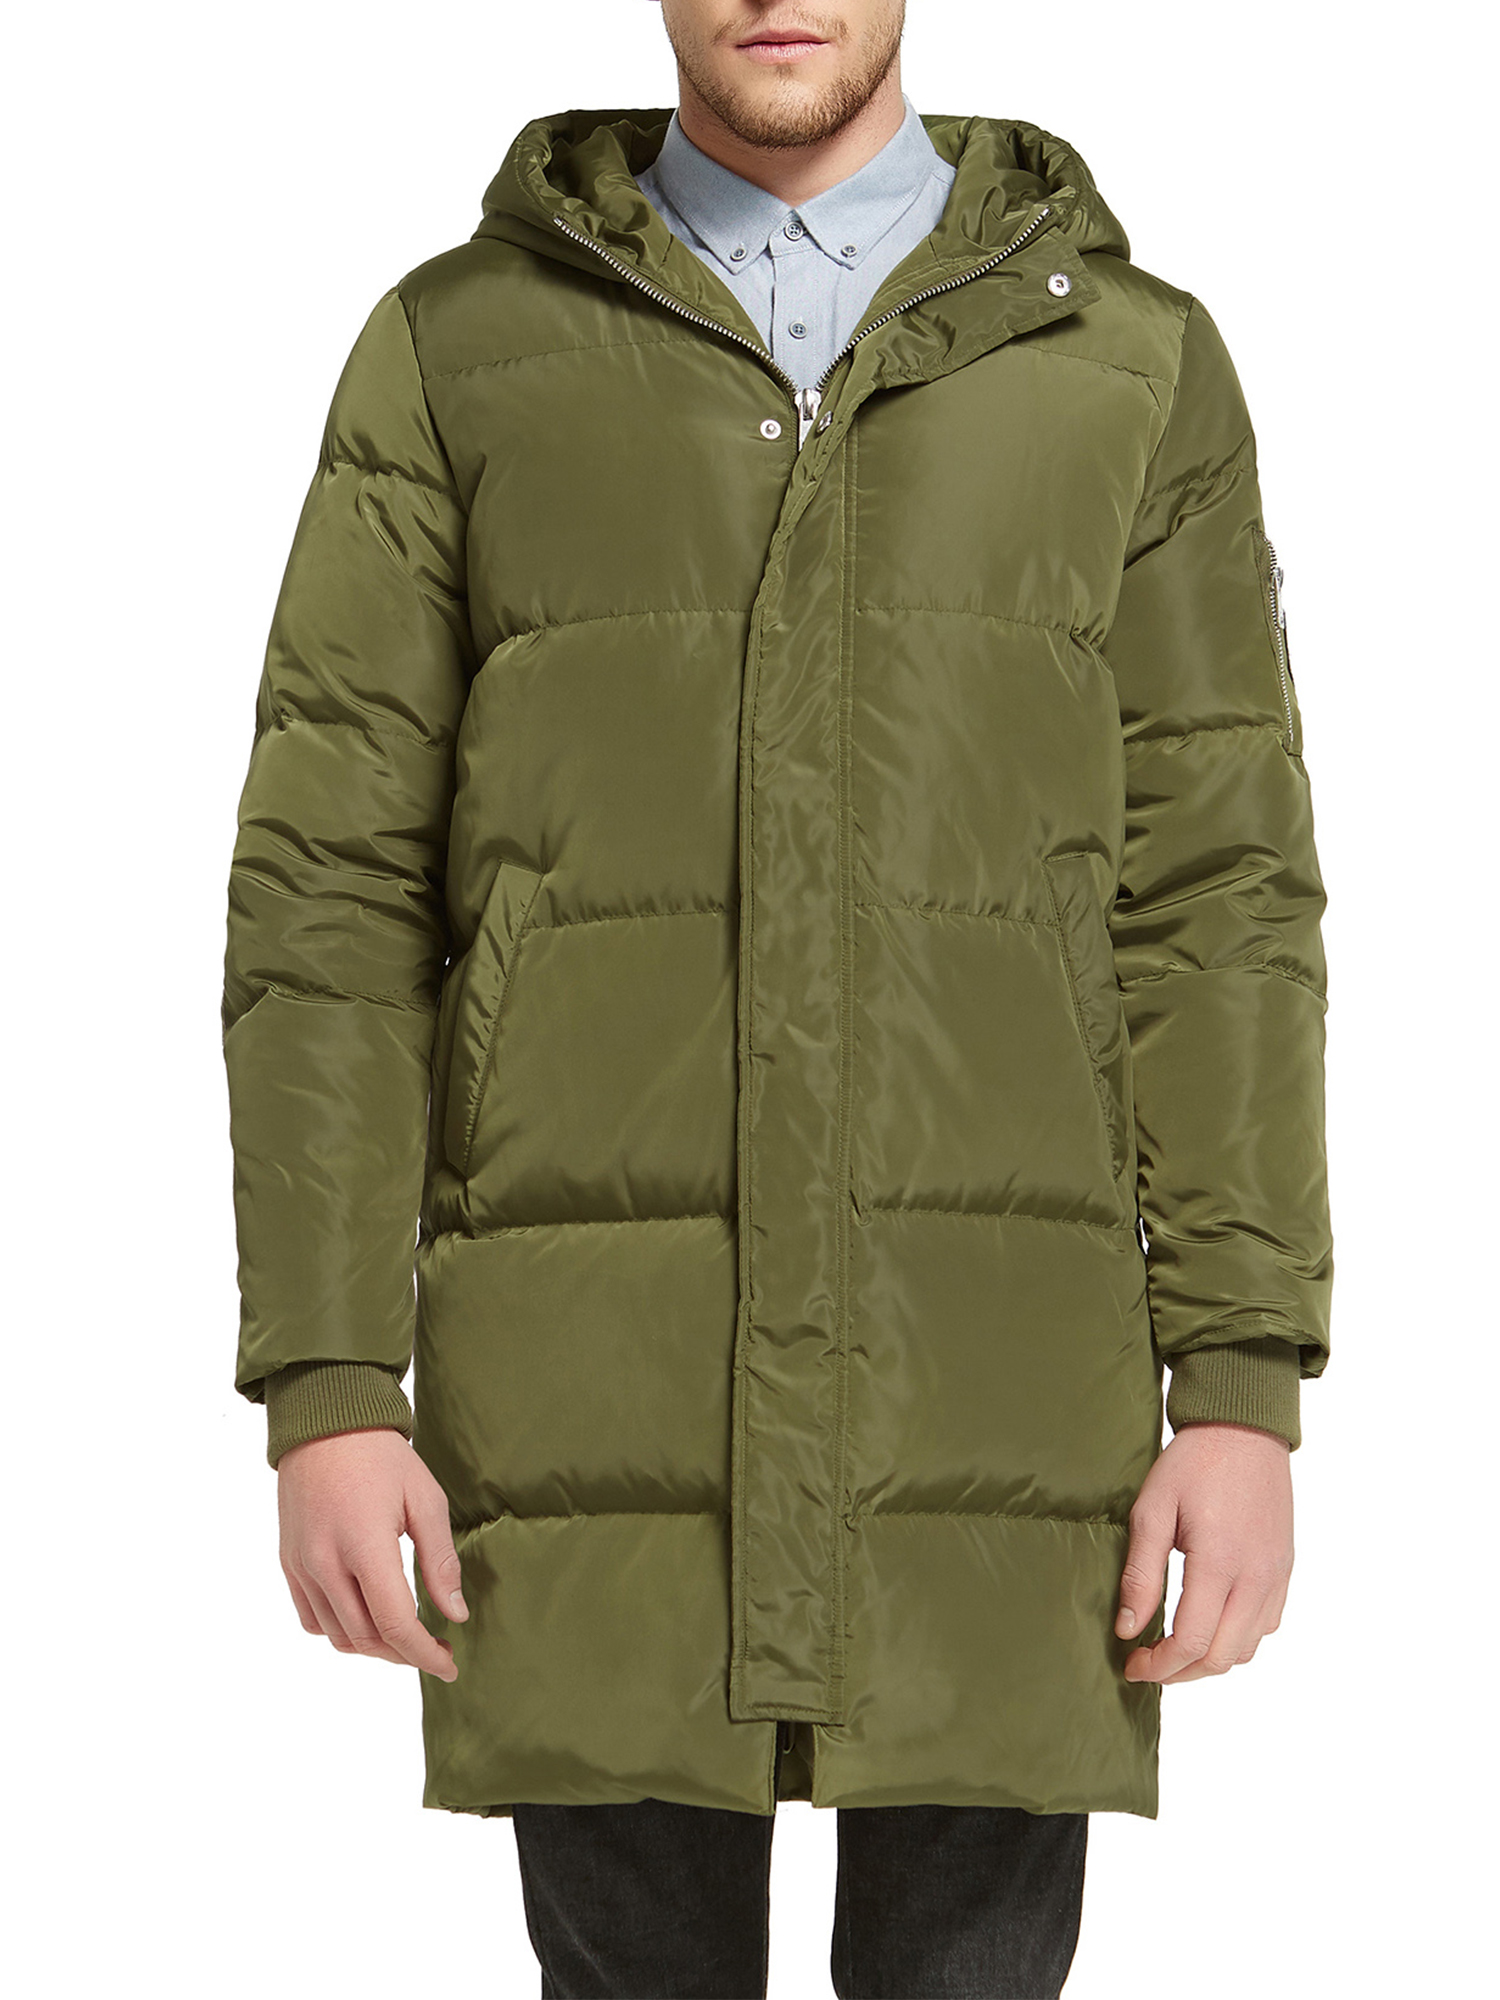 Orolay Men's Winter Down Jacket Down Puffer Jacket Plus Size - image 1 of 5